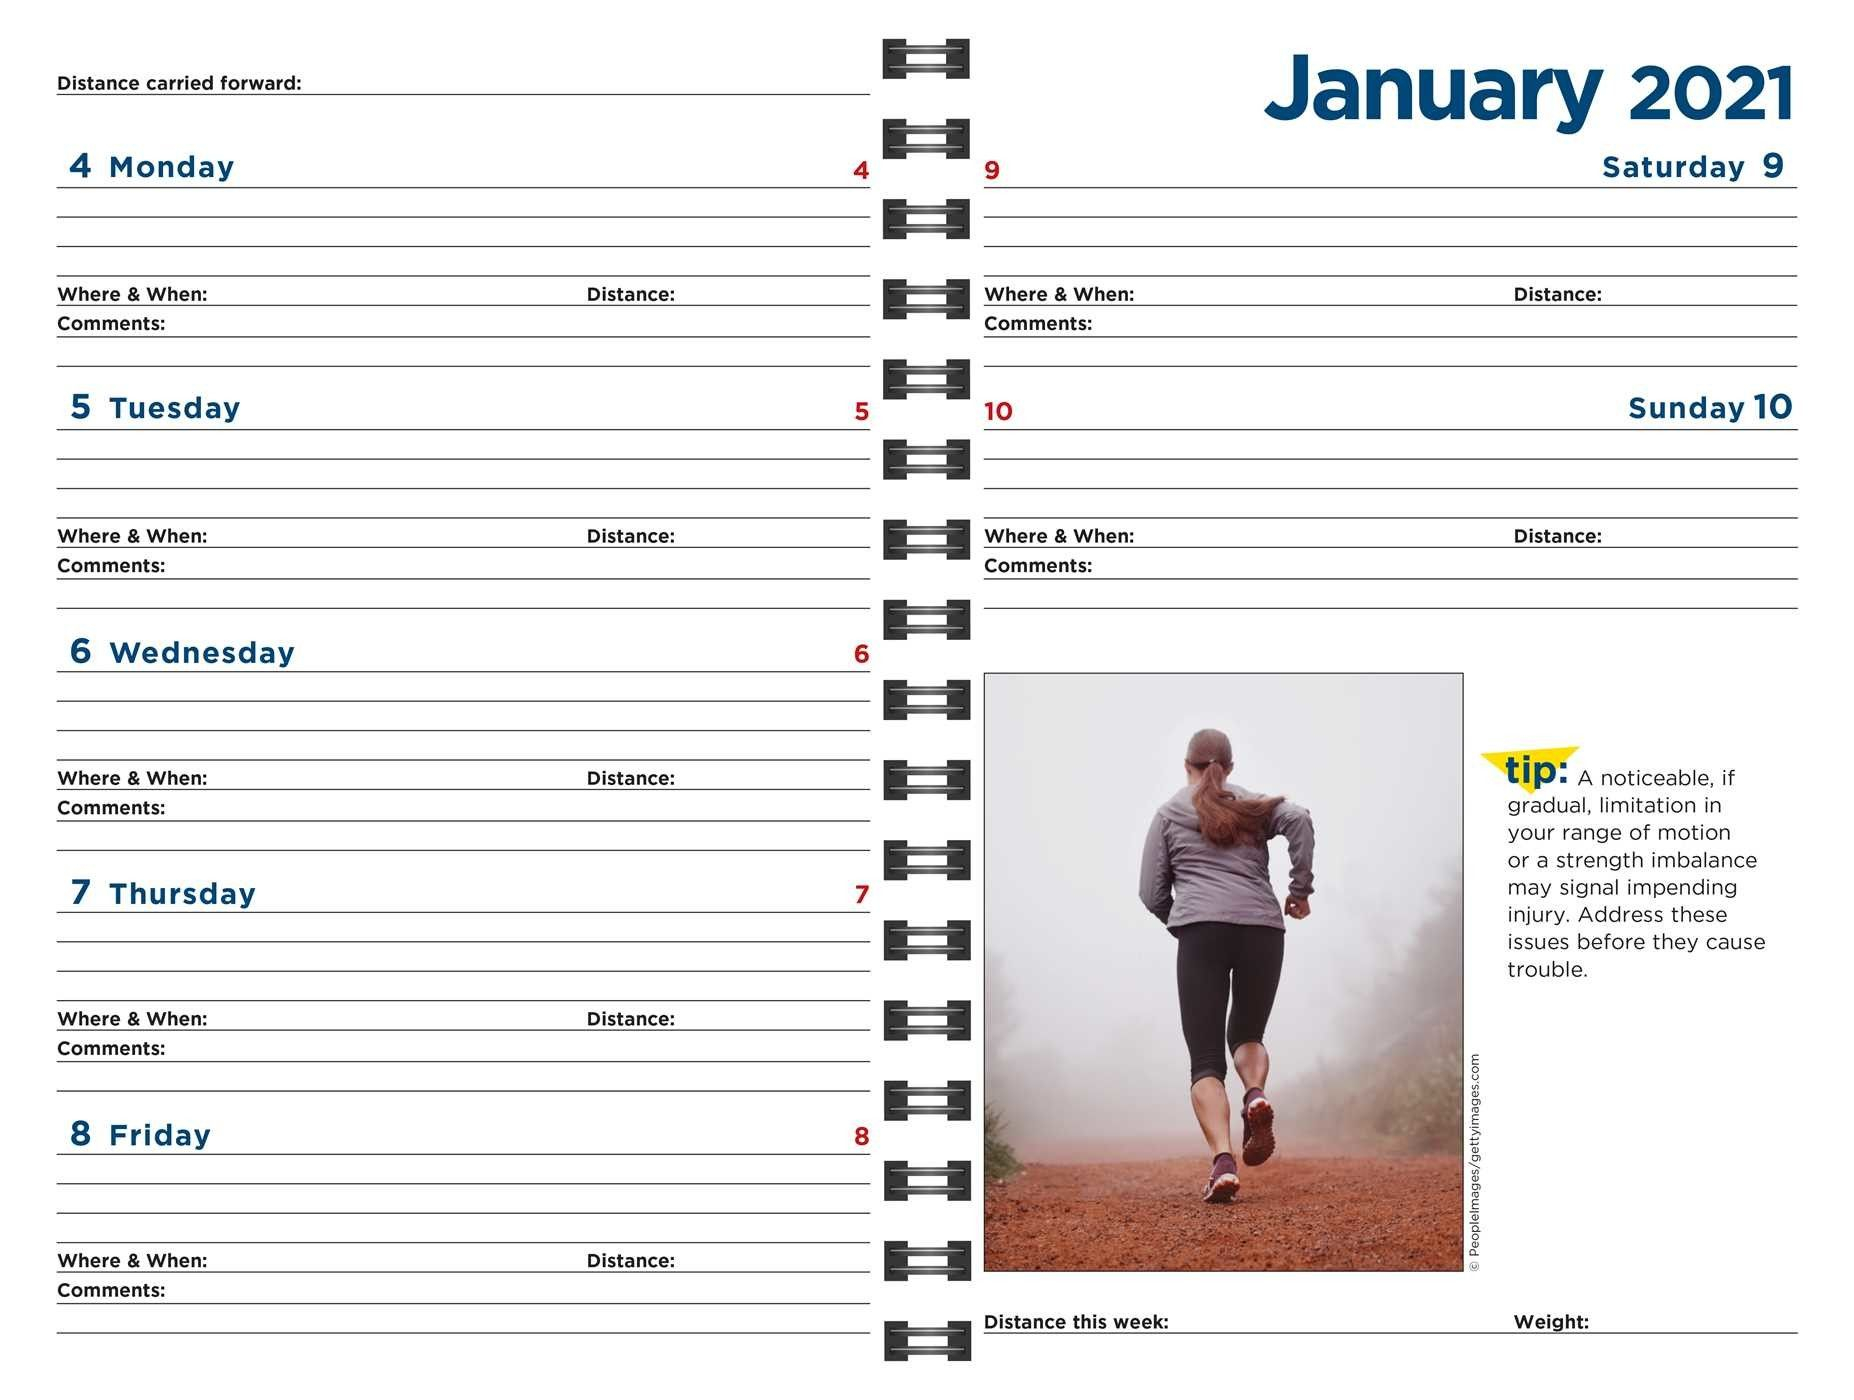 The Complete Runner's Day By Day Log 2021 Calendar Book Summary